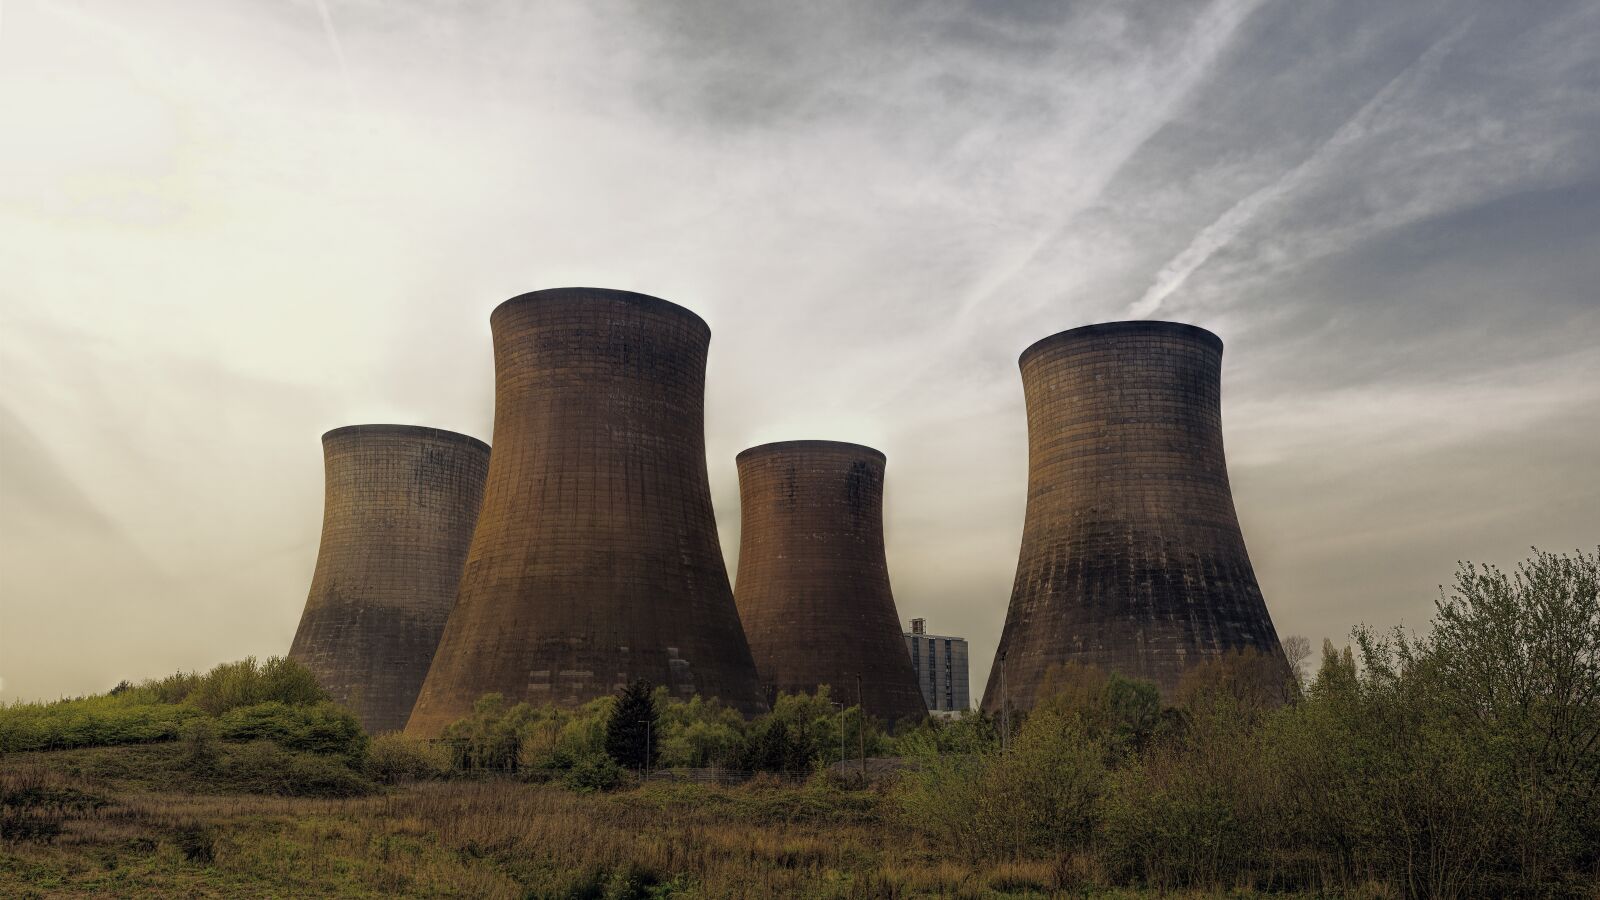 Sony a7 II sample photo. Cooling towers, industry, cold photography